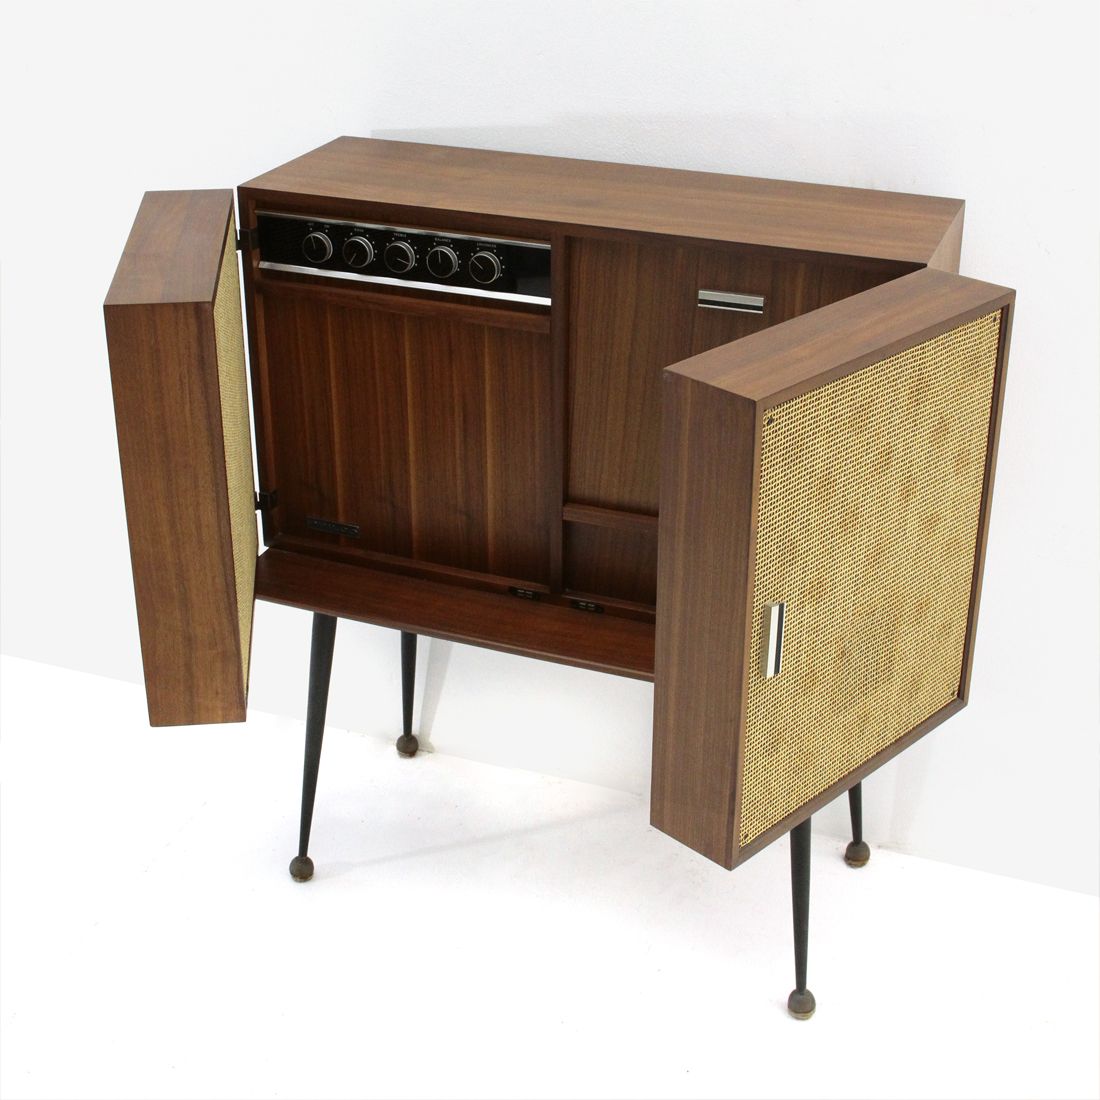 Simple Record Player Cabinet for Large Space